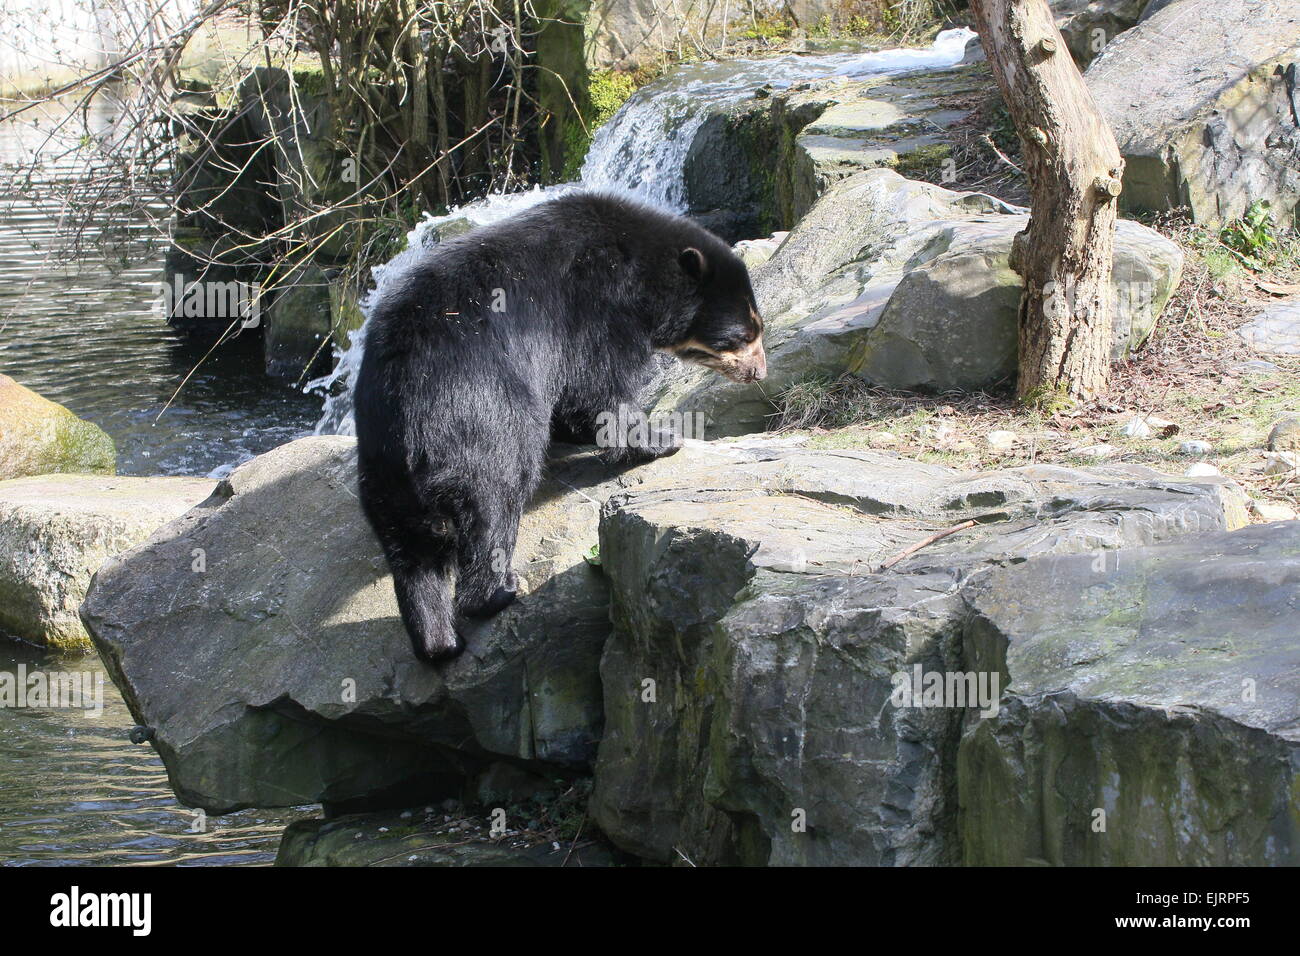 Spectacled or  Andean bear (Tremarctos ornatus) climbing up a river bank Stock Photo